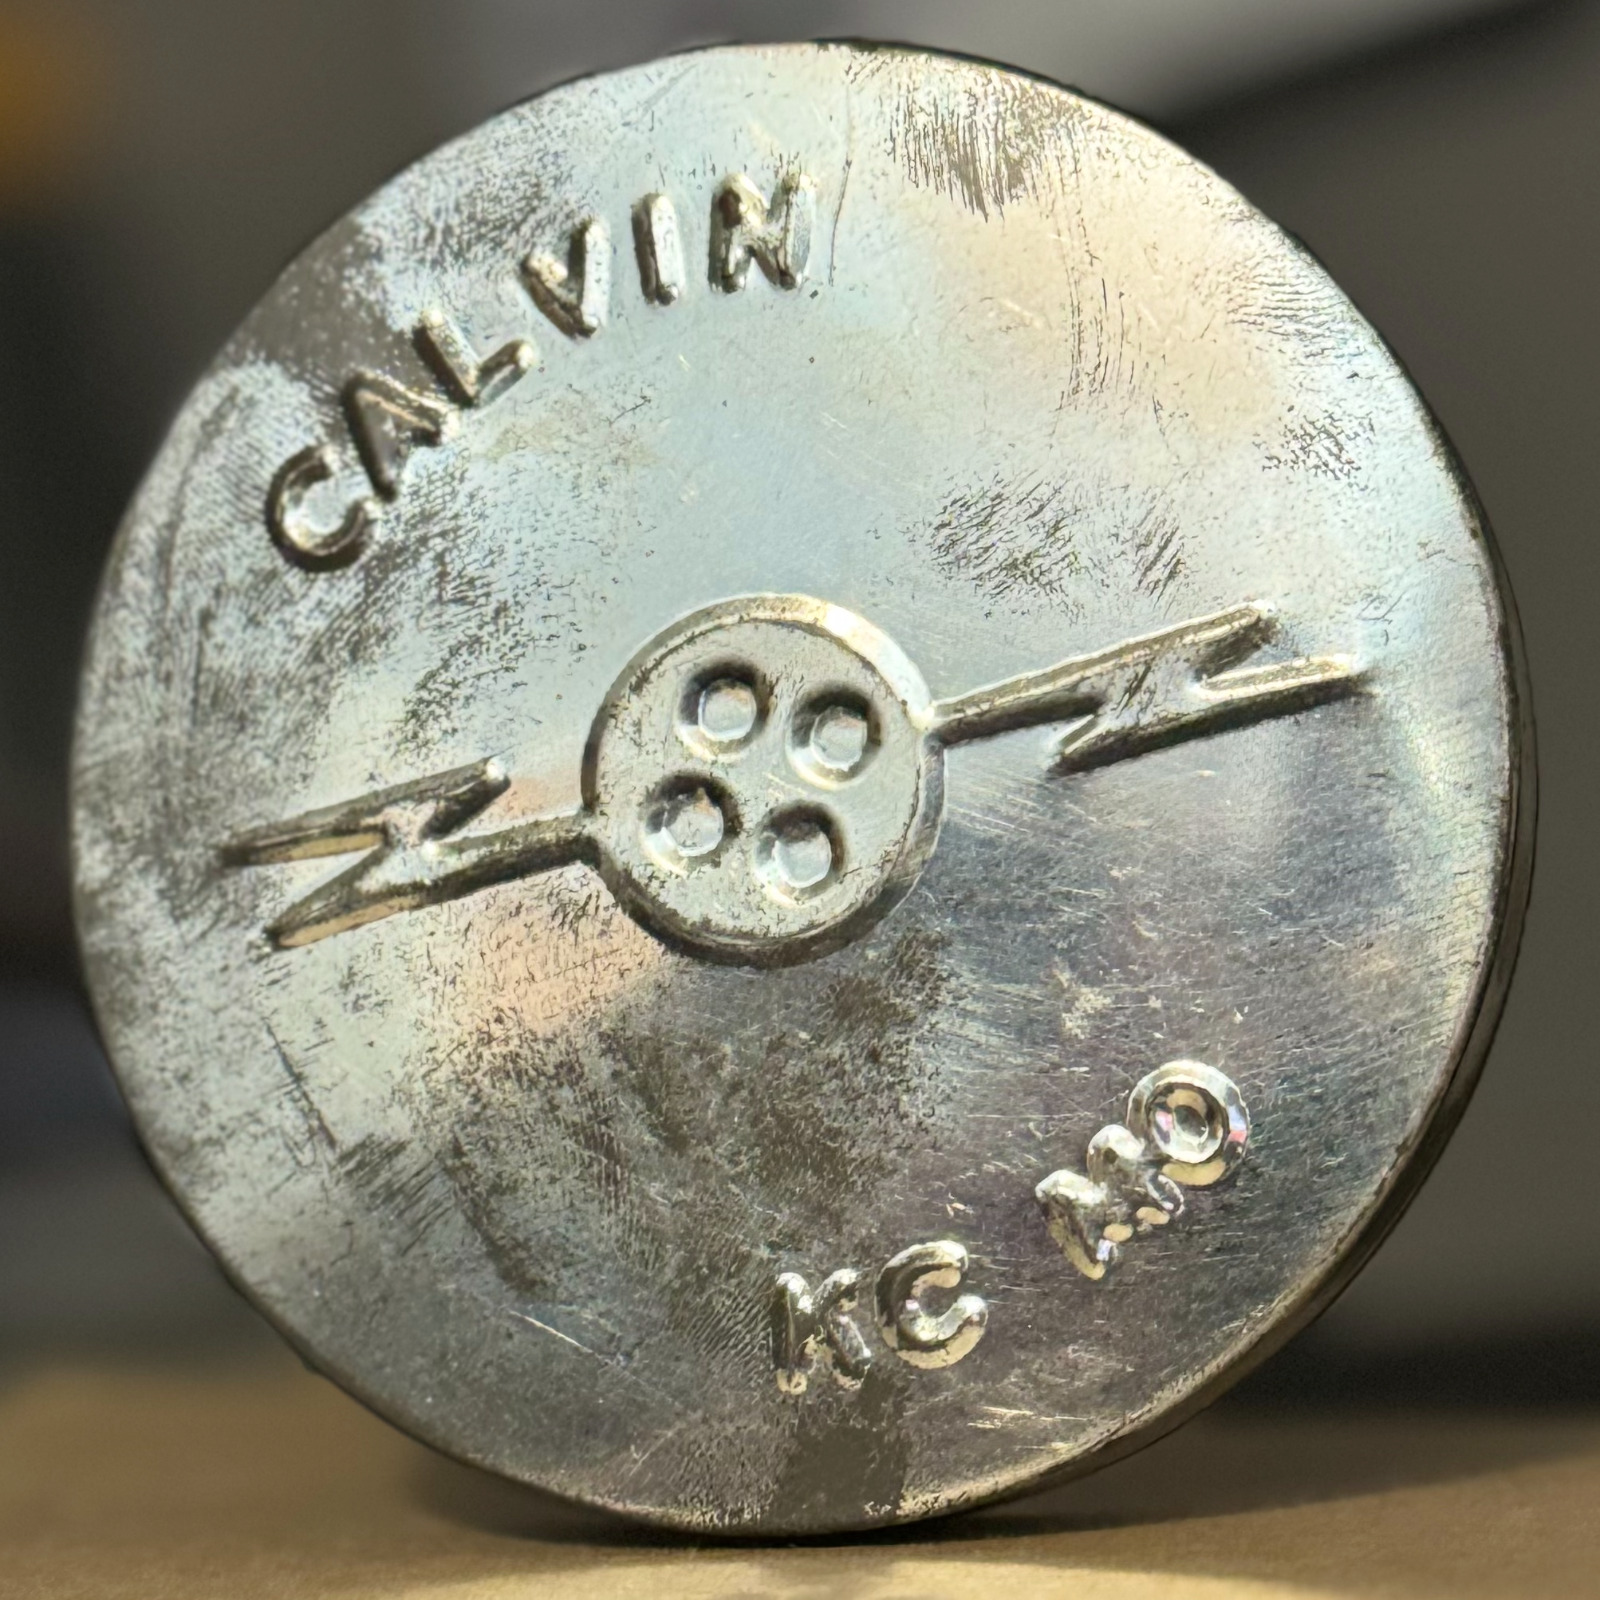 📽️ CALVIN COMPANY 8mm Film Canister with Iconic 'Lightning Bolt' Logo RARE 🔥